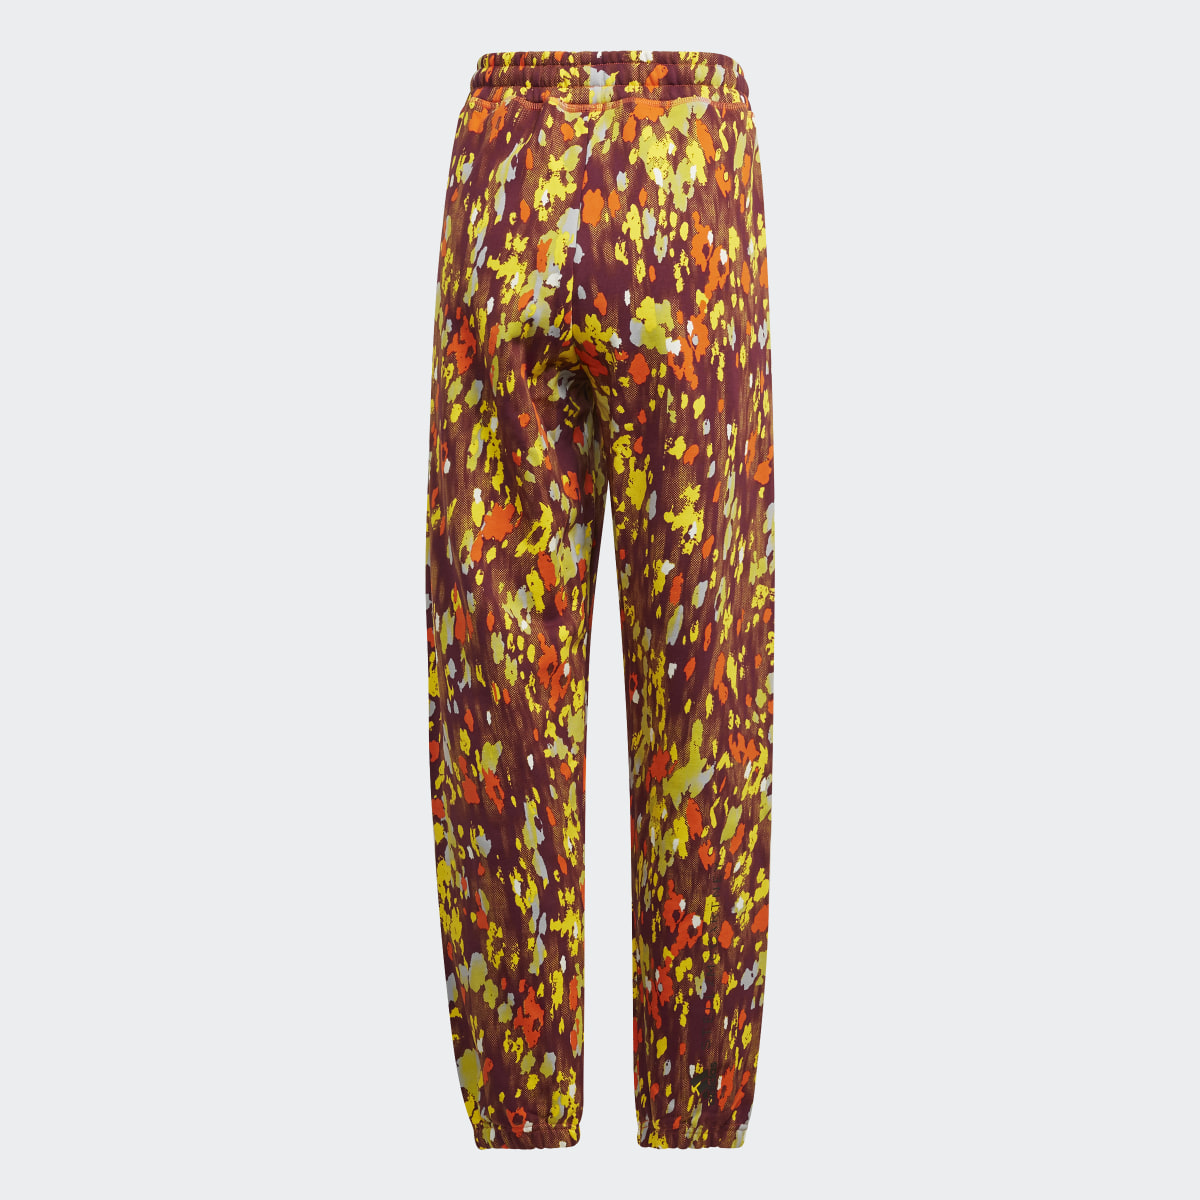 Adidas by Stella McCartney Floral Printed Woven Track Joggers. 6